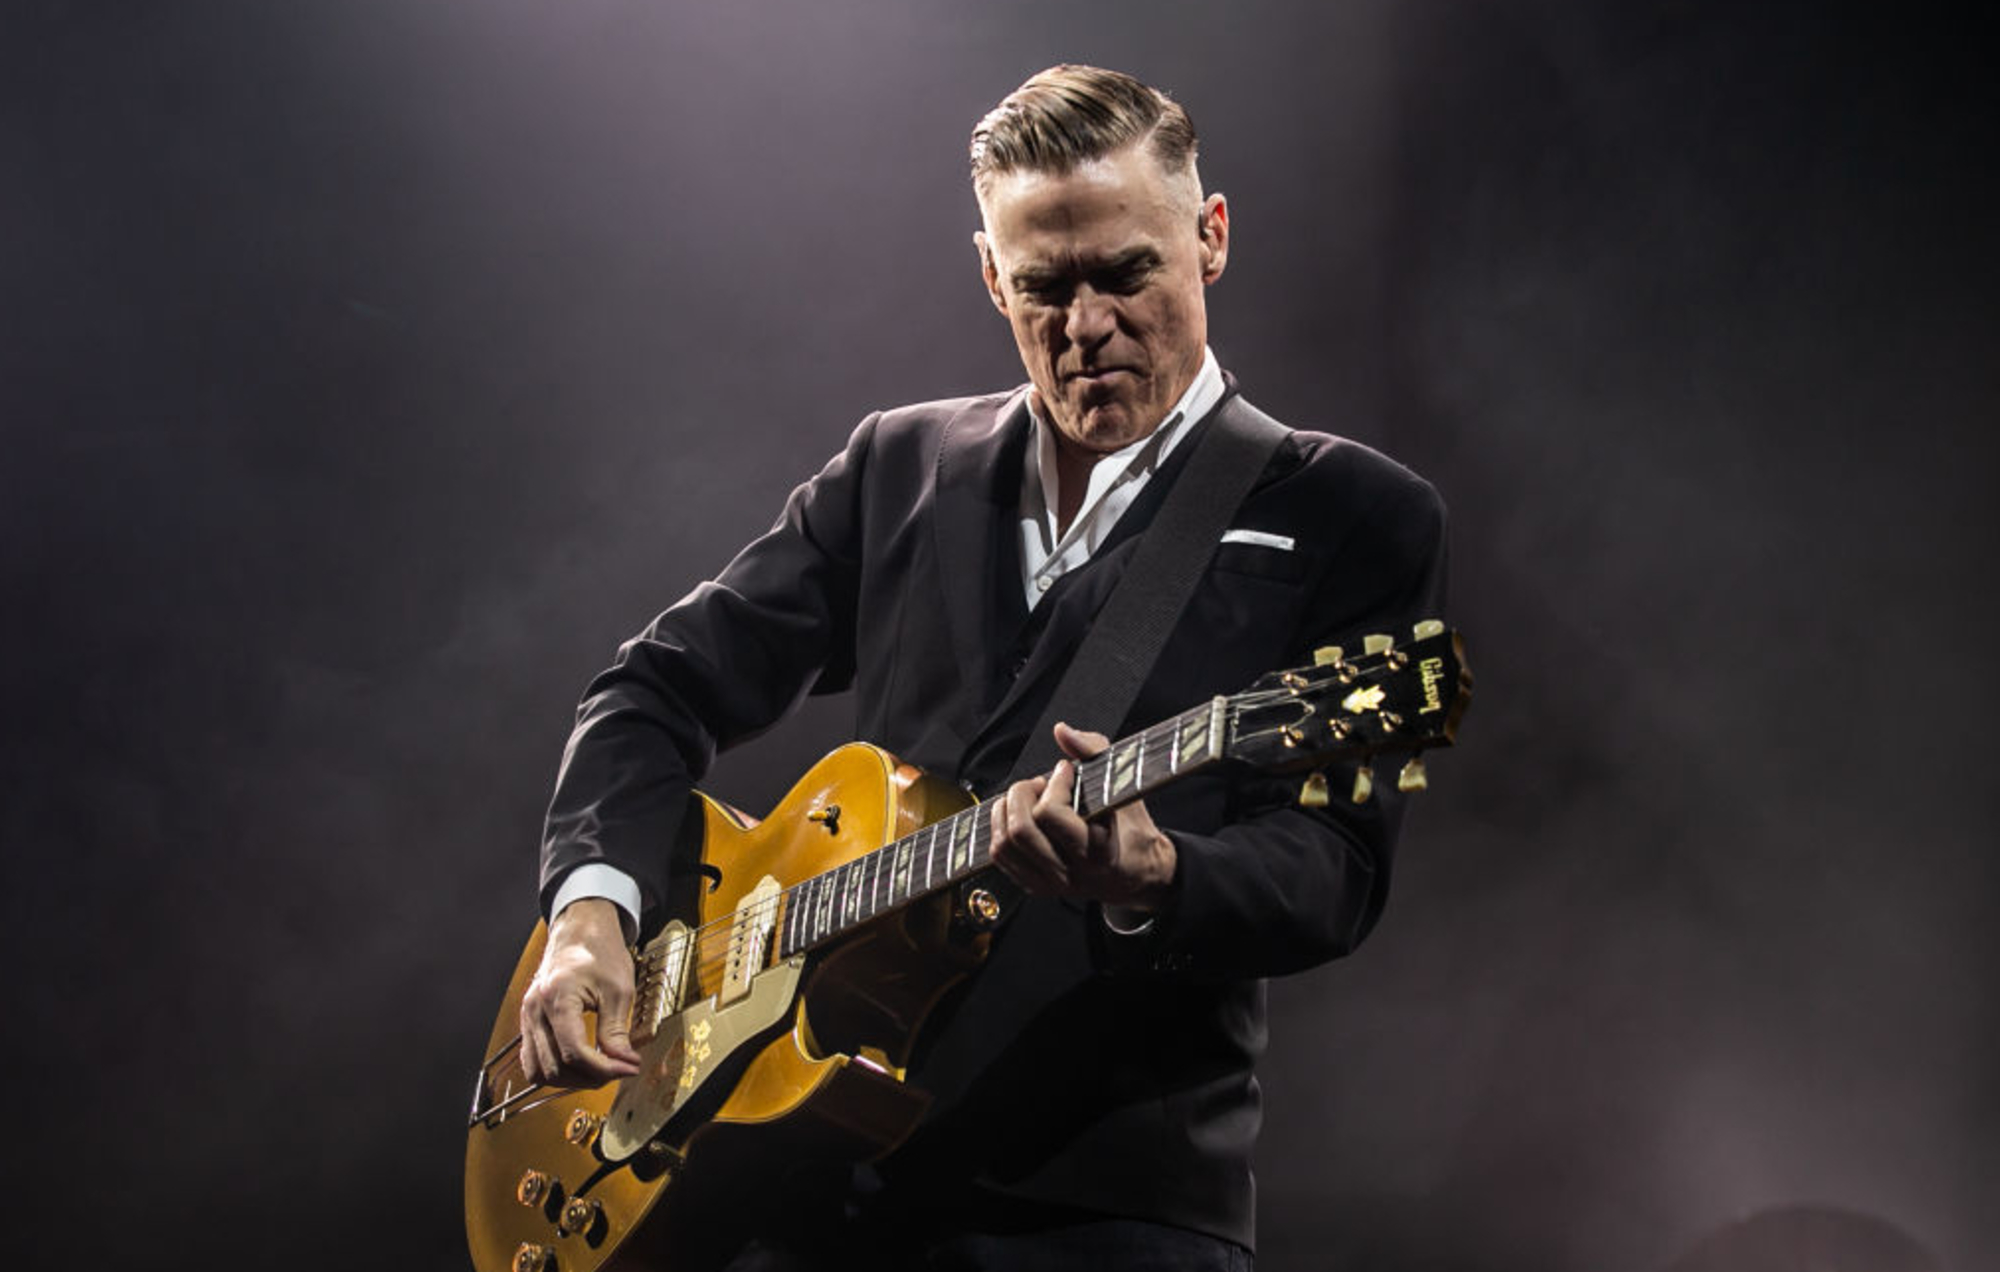 Bryan Adams wearing a black suit while playing a guitar